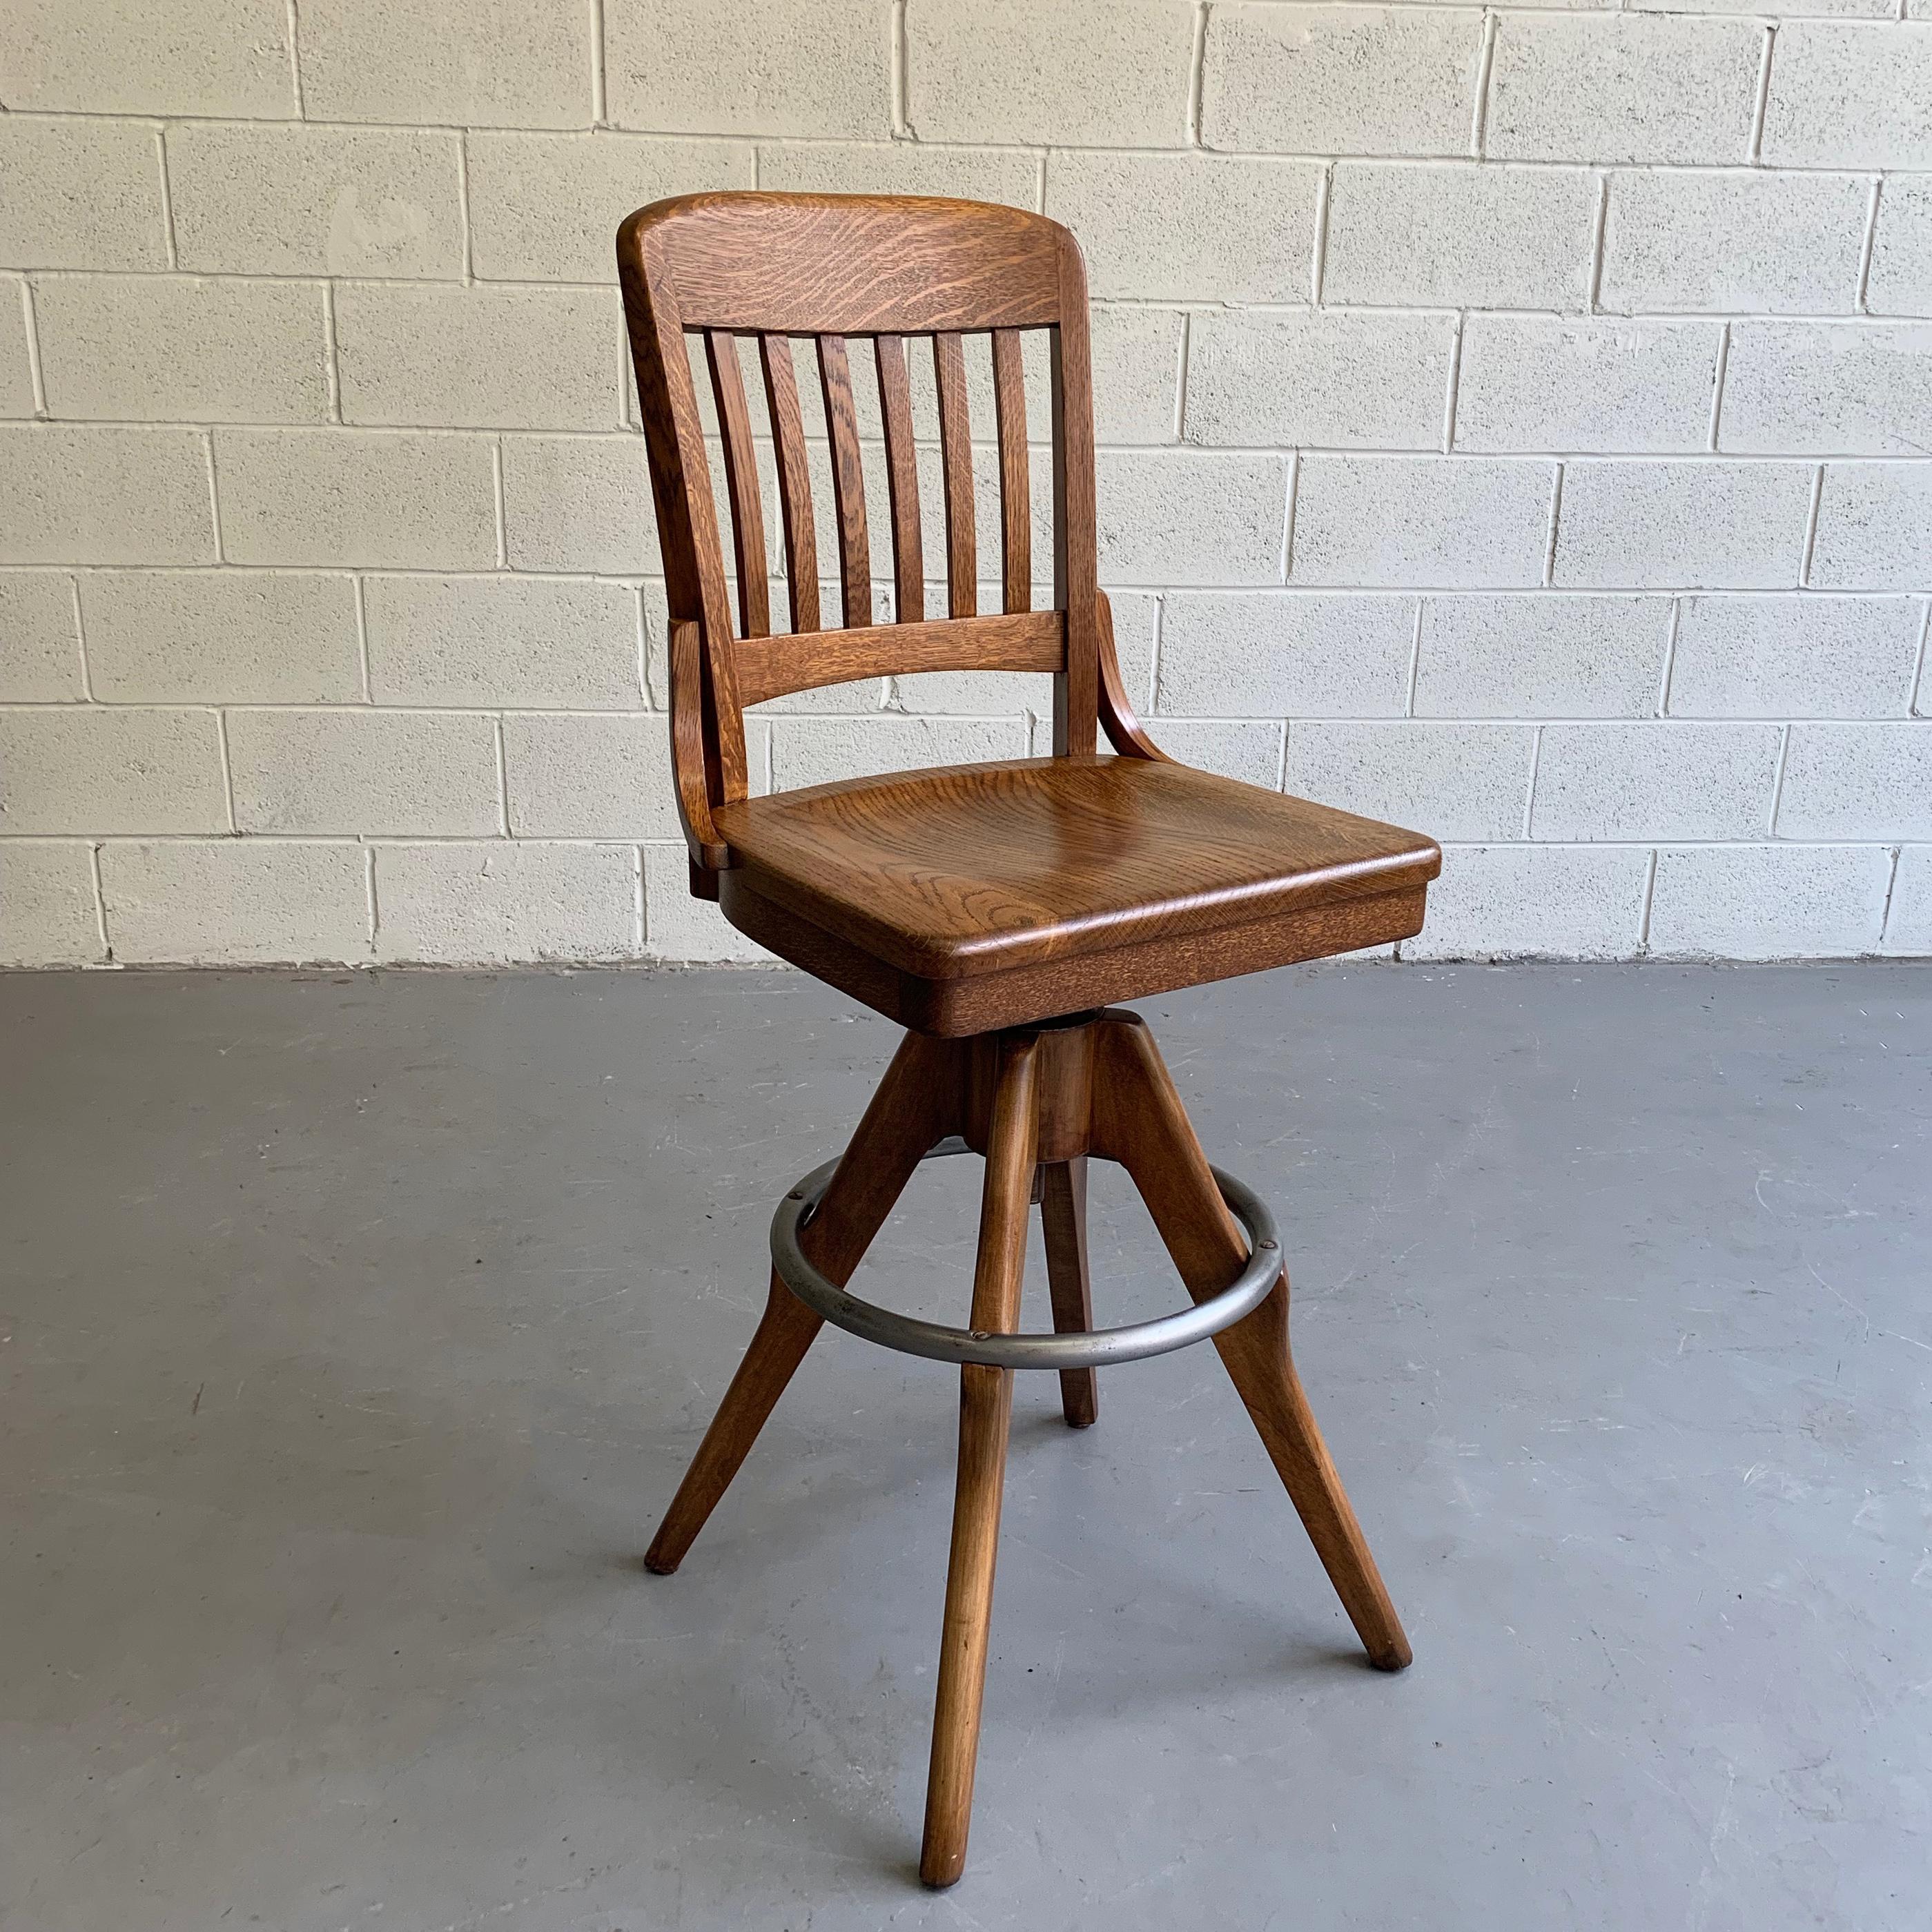 Handsome, industrial, oak drafting stool by Gunlocke features a swivel, seat that is height adjustable from 28-31 inches and a steel ring footrest. The seat measures 18.5 inches wide x 16 inches deep, the foot print is 26 inches diameter.